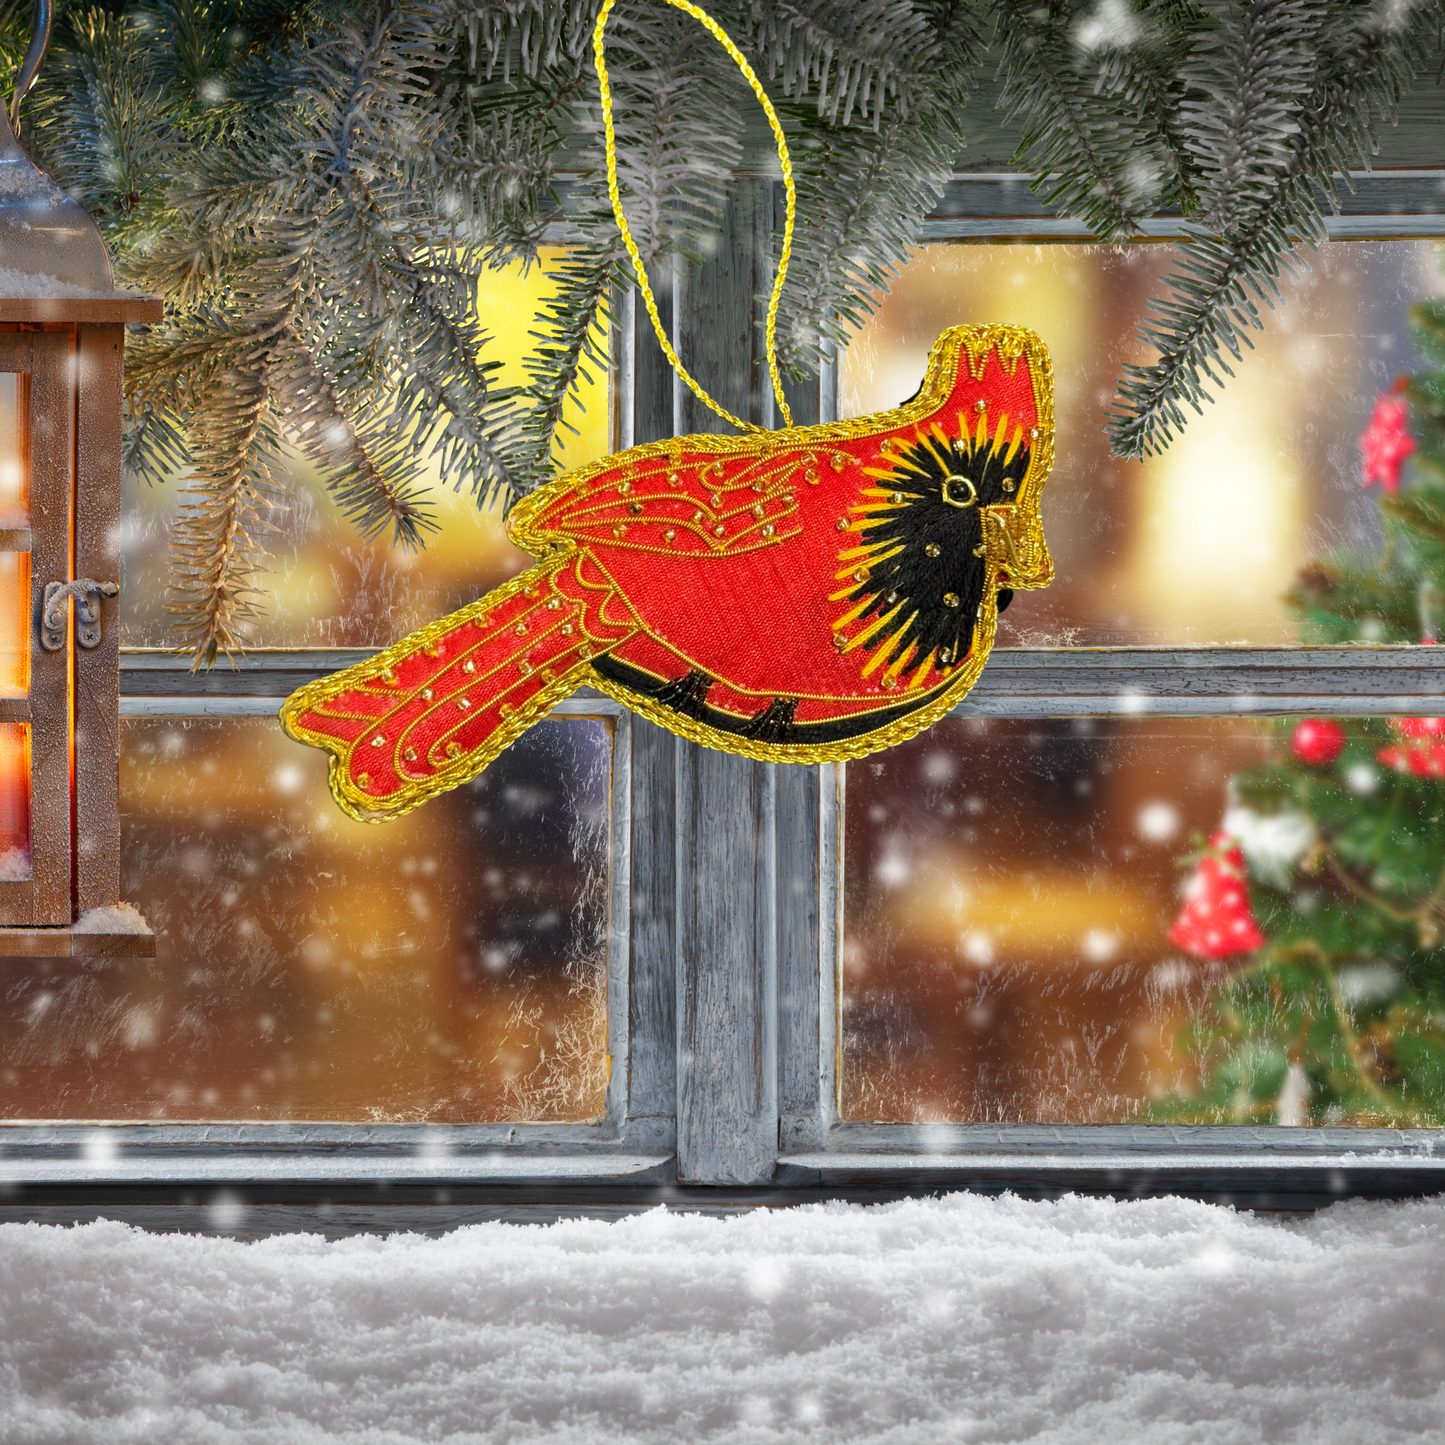 Red Cardinal ornament with Zari embroidery as a window hanging